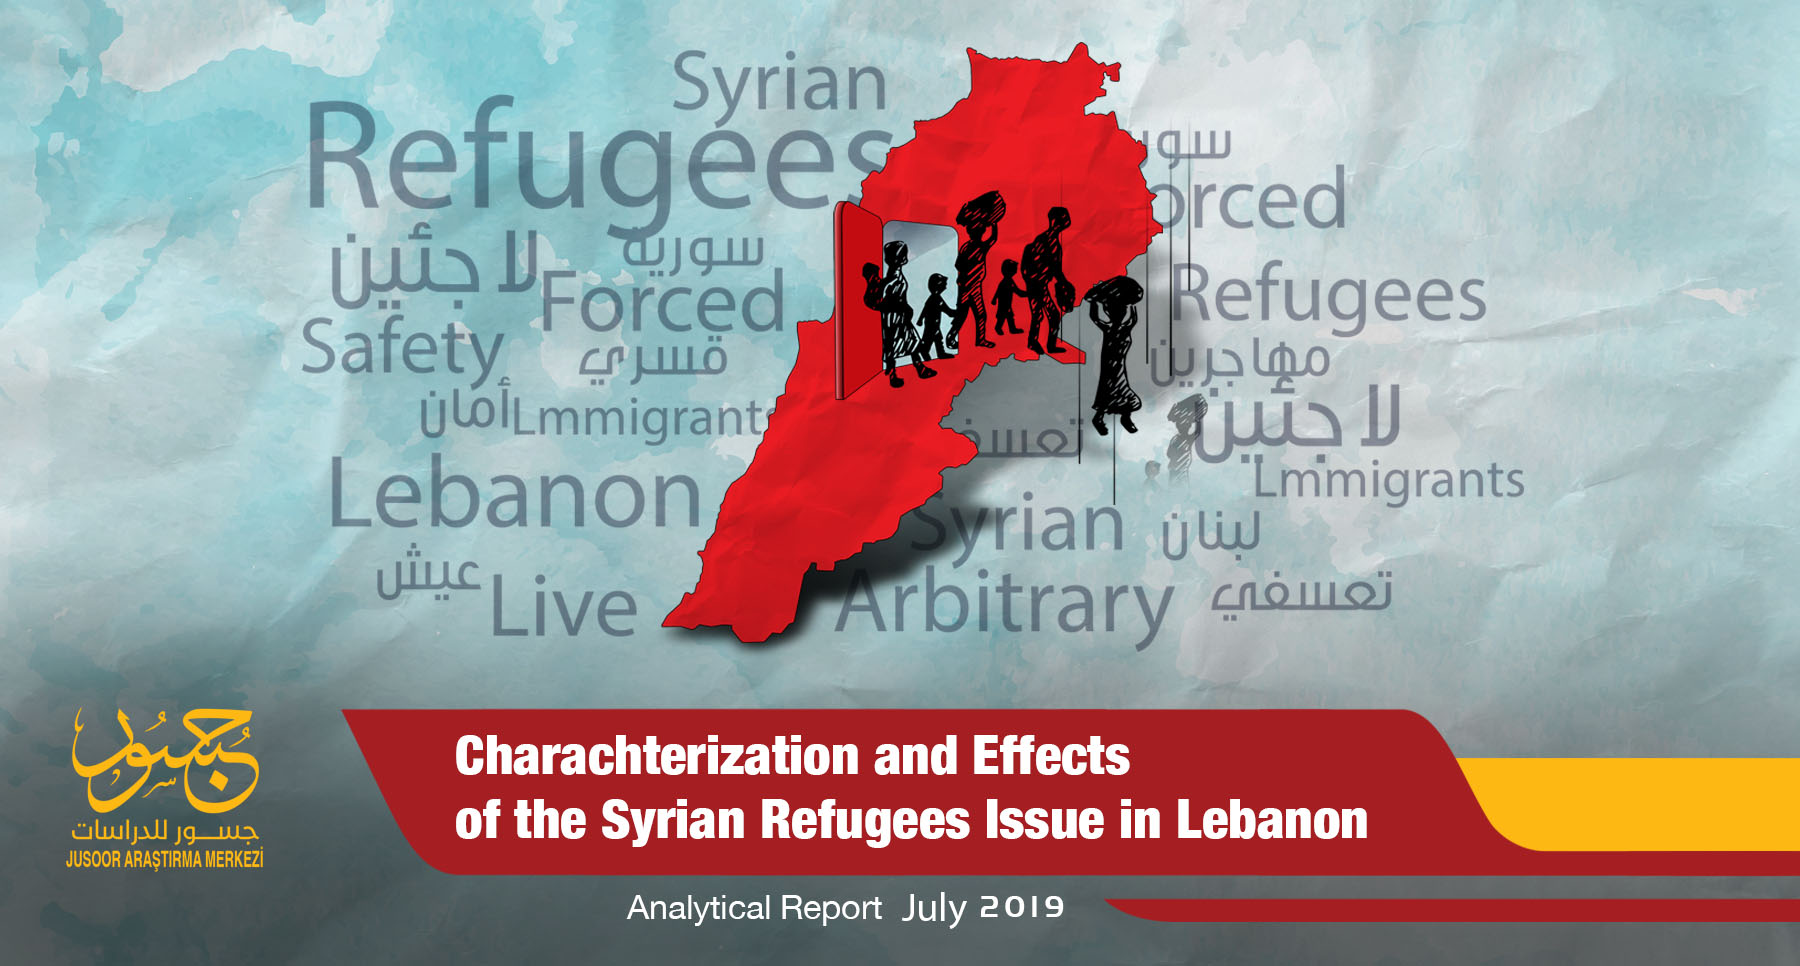 Characterization and Effects of the Syrian Refugee Issue in Lebanon